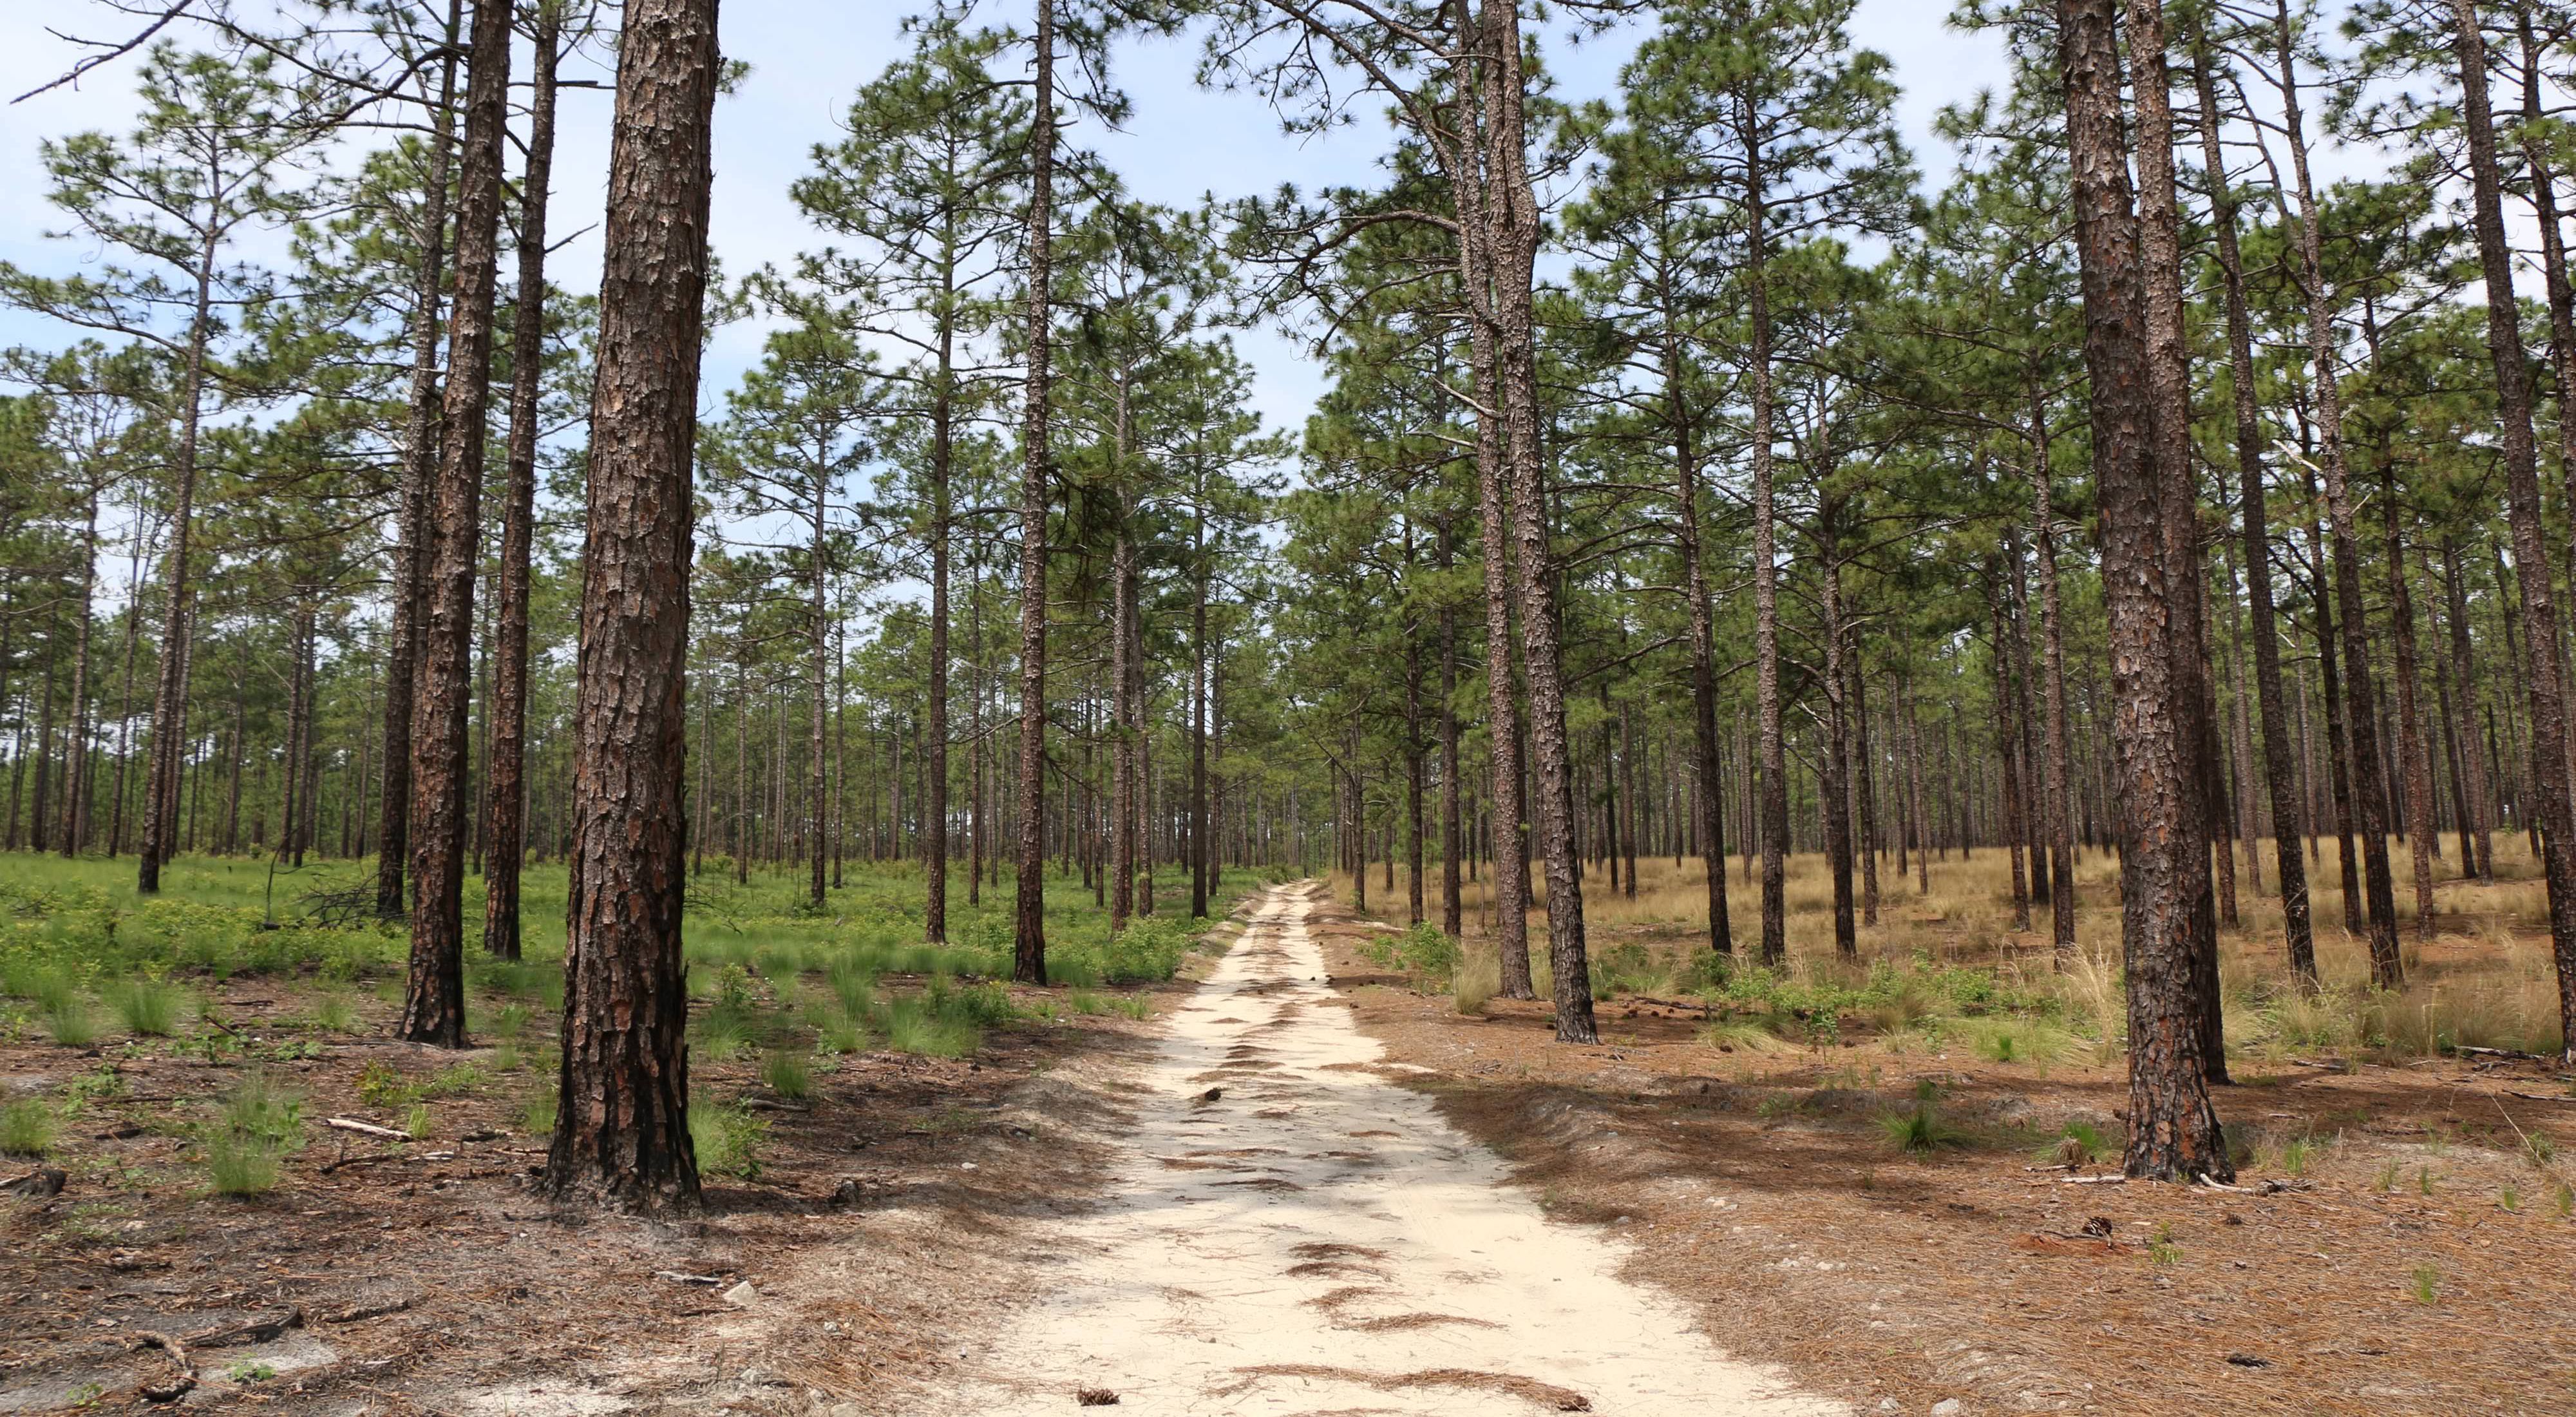 The sandy road that winds through Calloway Forest Preserve.